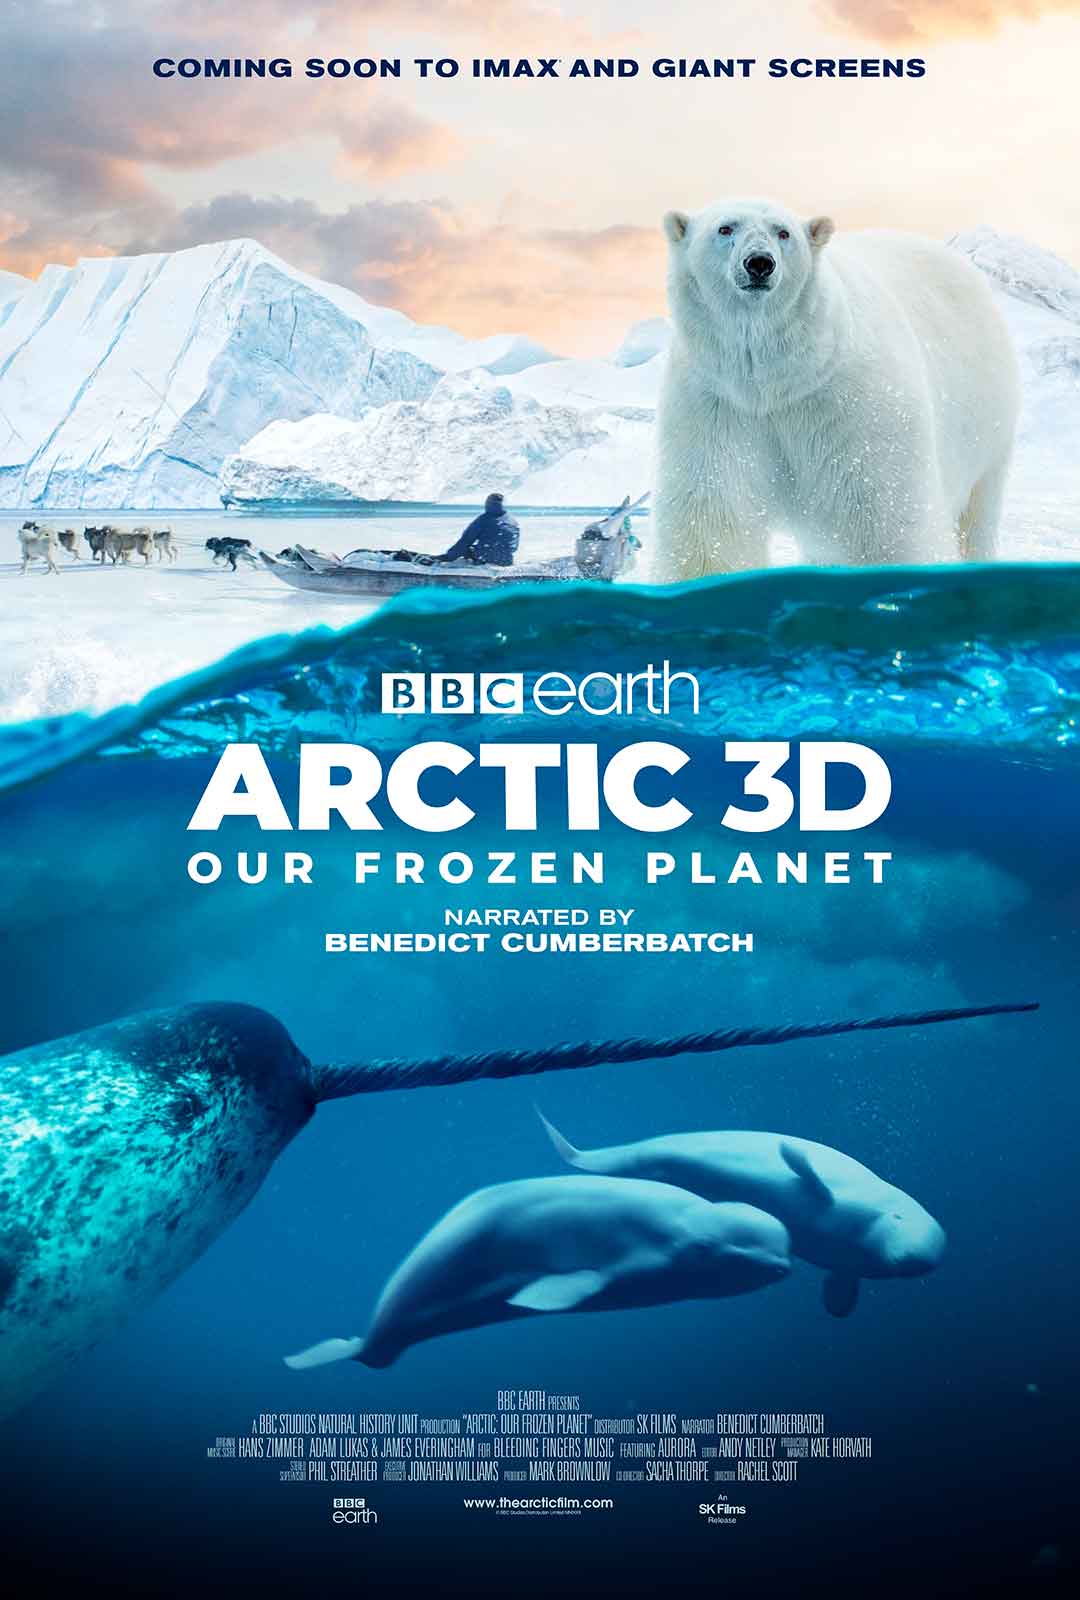 Arctic: Our Frozen Planet 3D poster with a polar bear and manatees